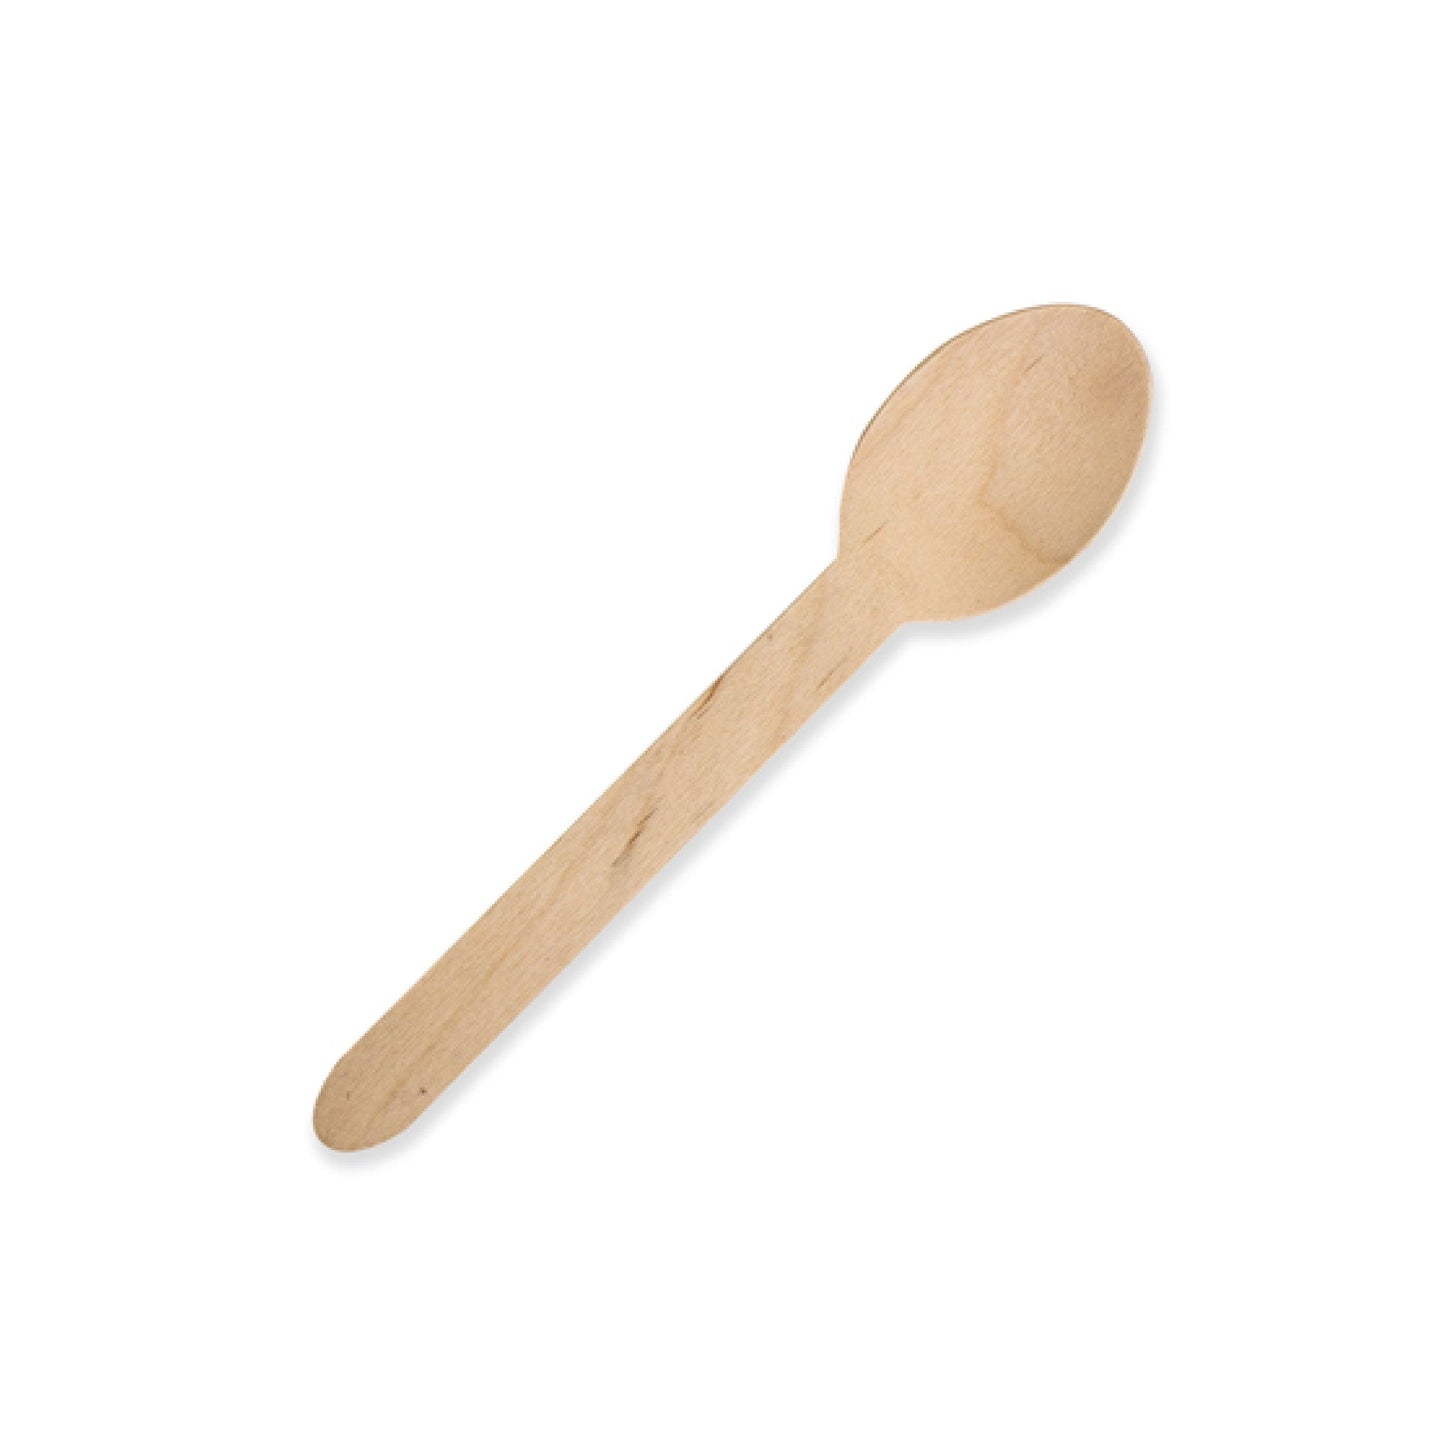 Bulk Compostable Wooden Spoons - Biodegradable Eco Friendly Disposable Cutlery